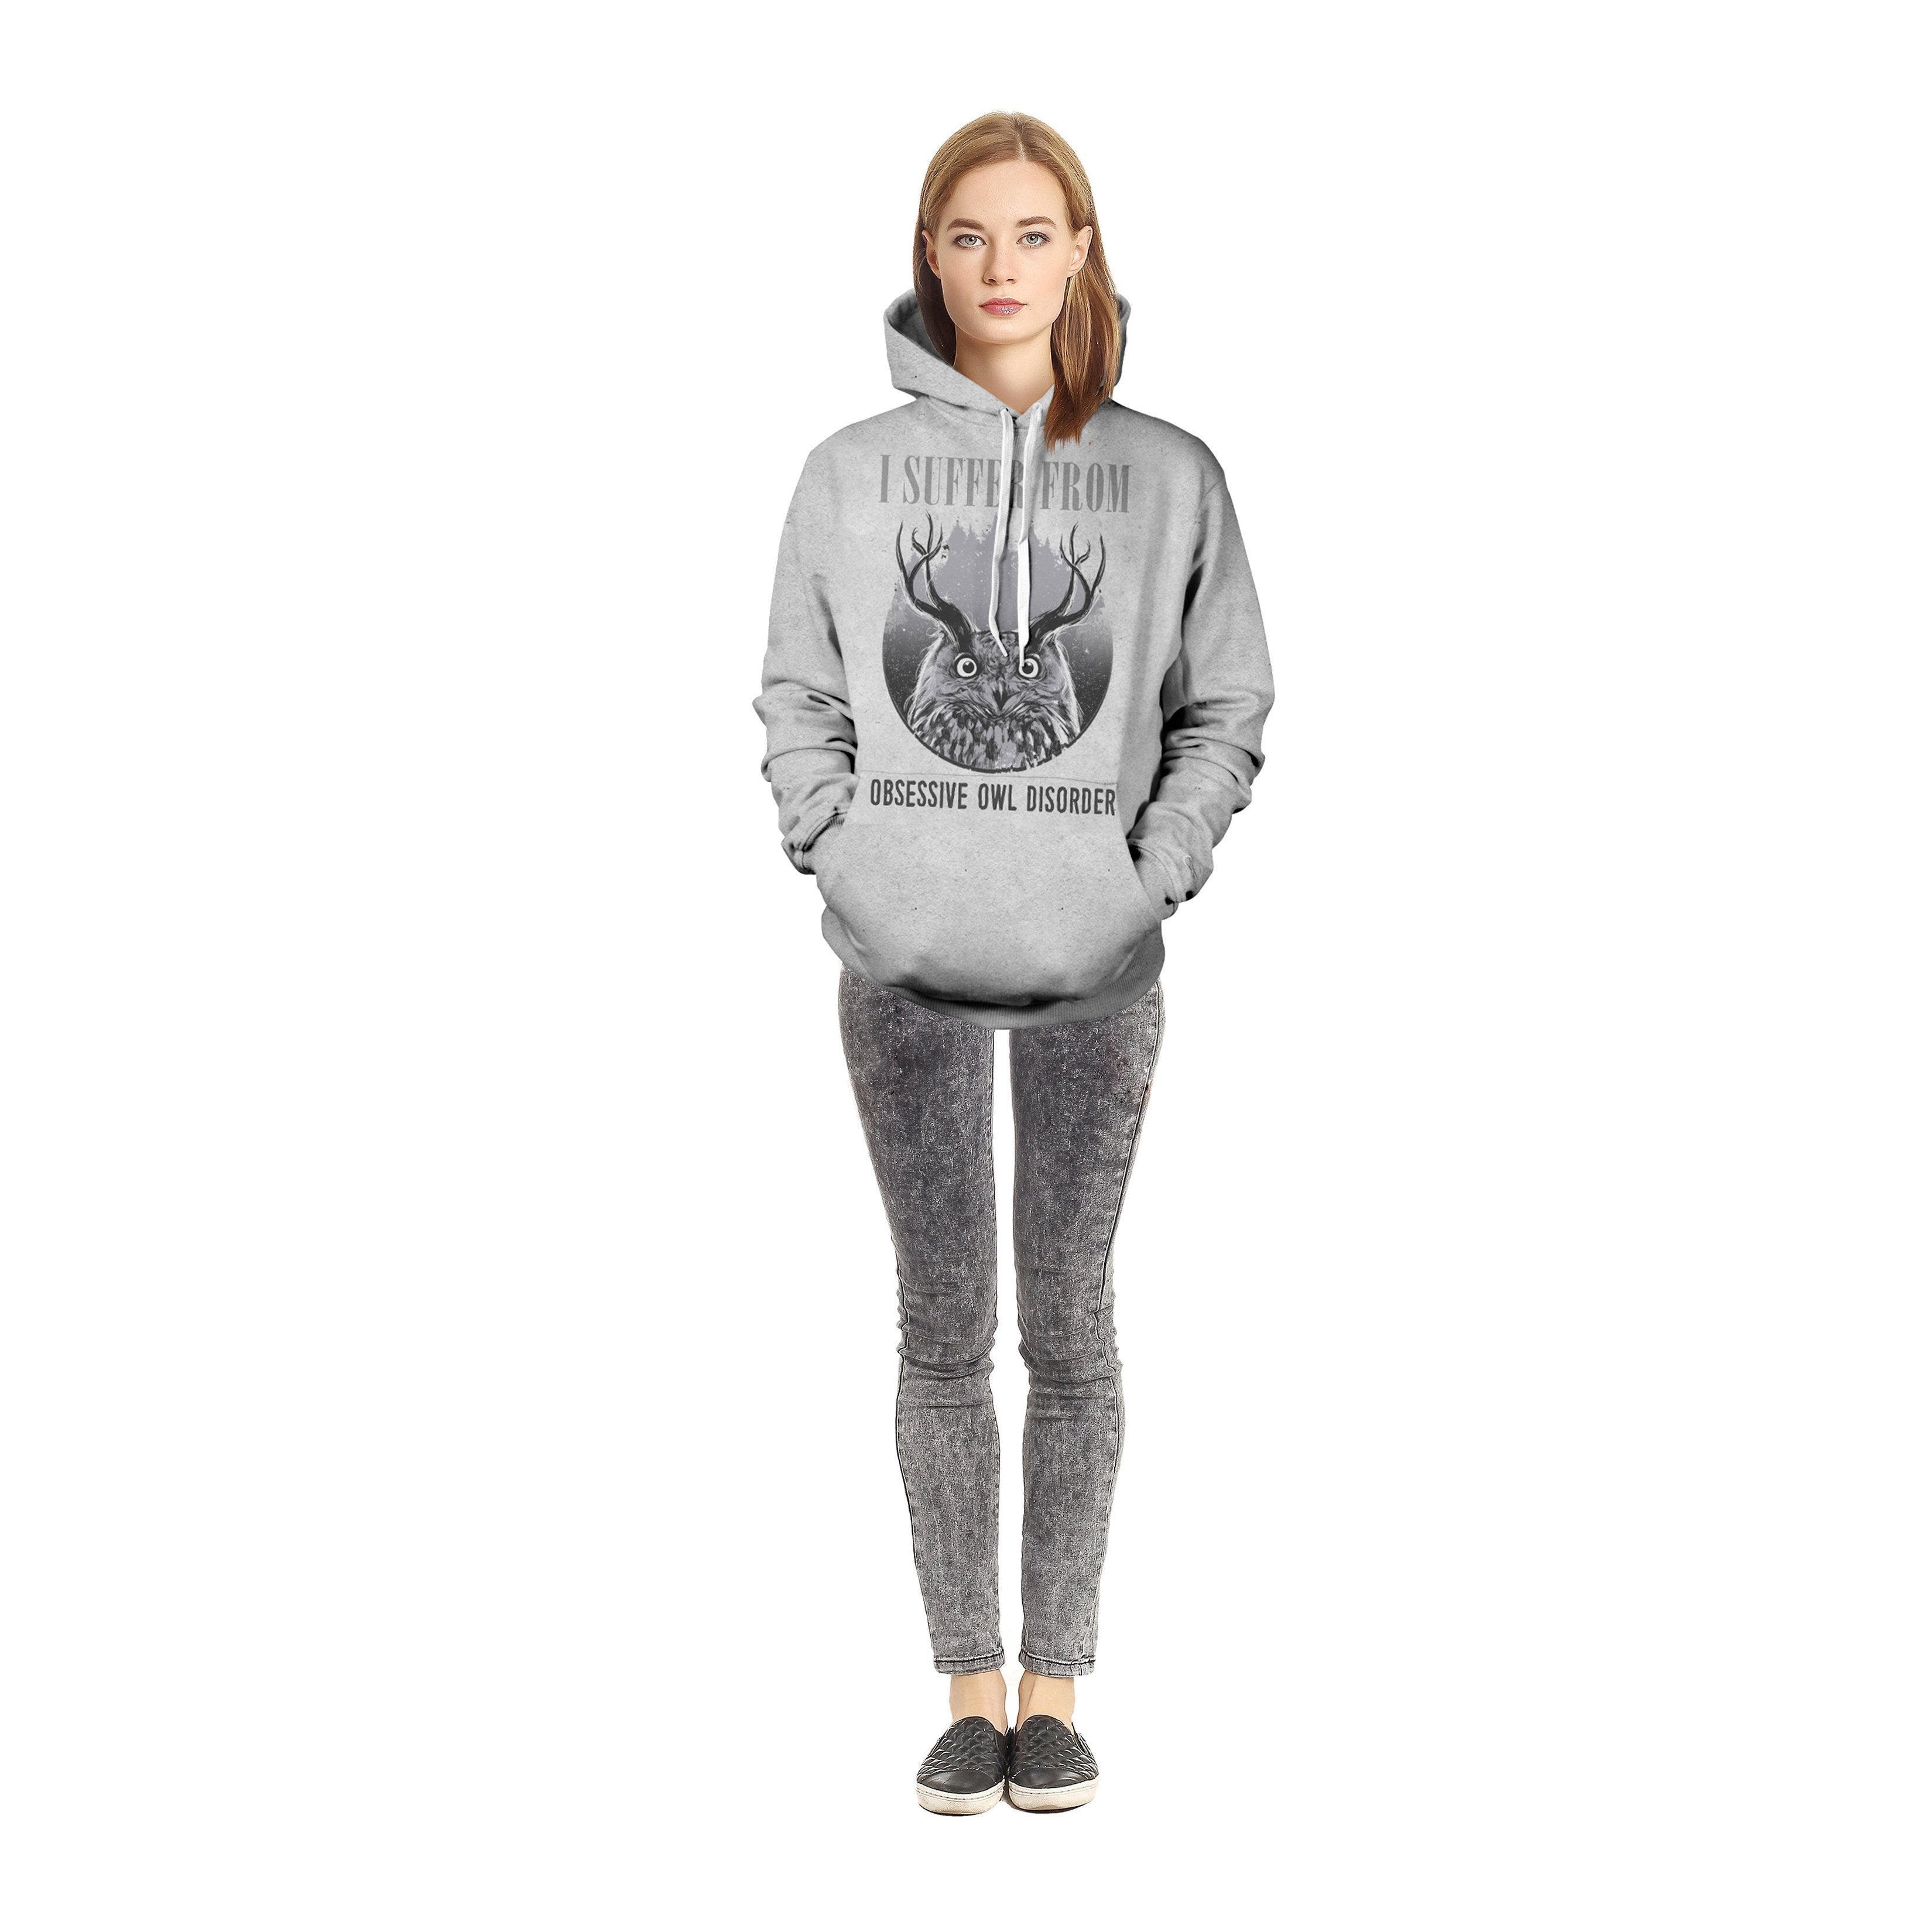 Obsessive Owl Disorder Unisex Pullover Hoodie